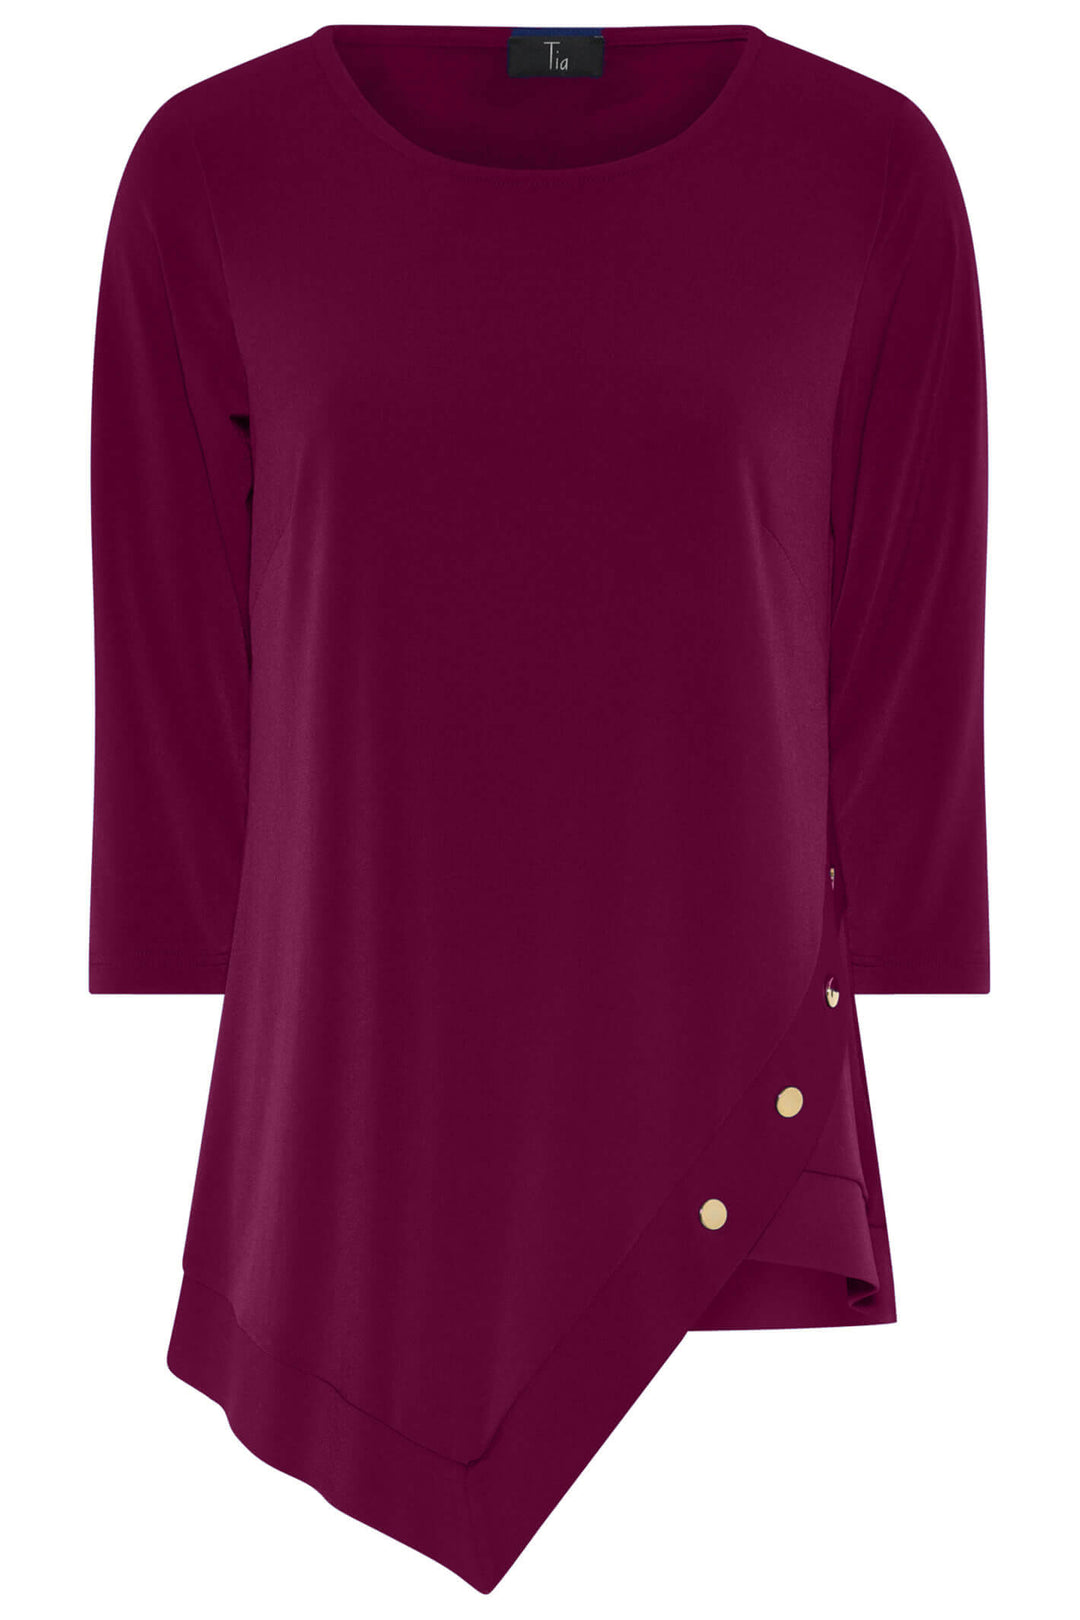 Tia 73037 5600 Magenta Pink Button Detail Top - Experience Boutique